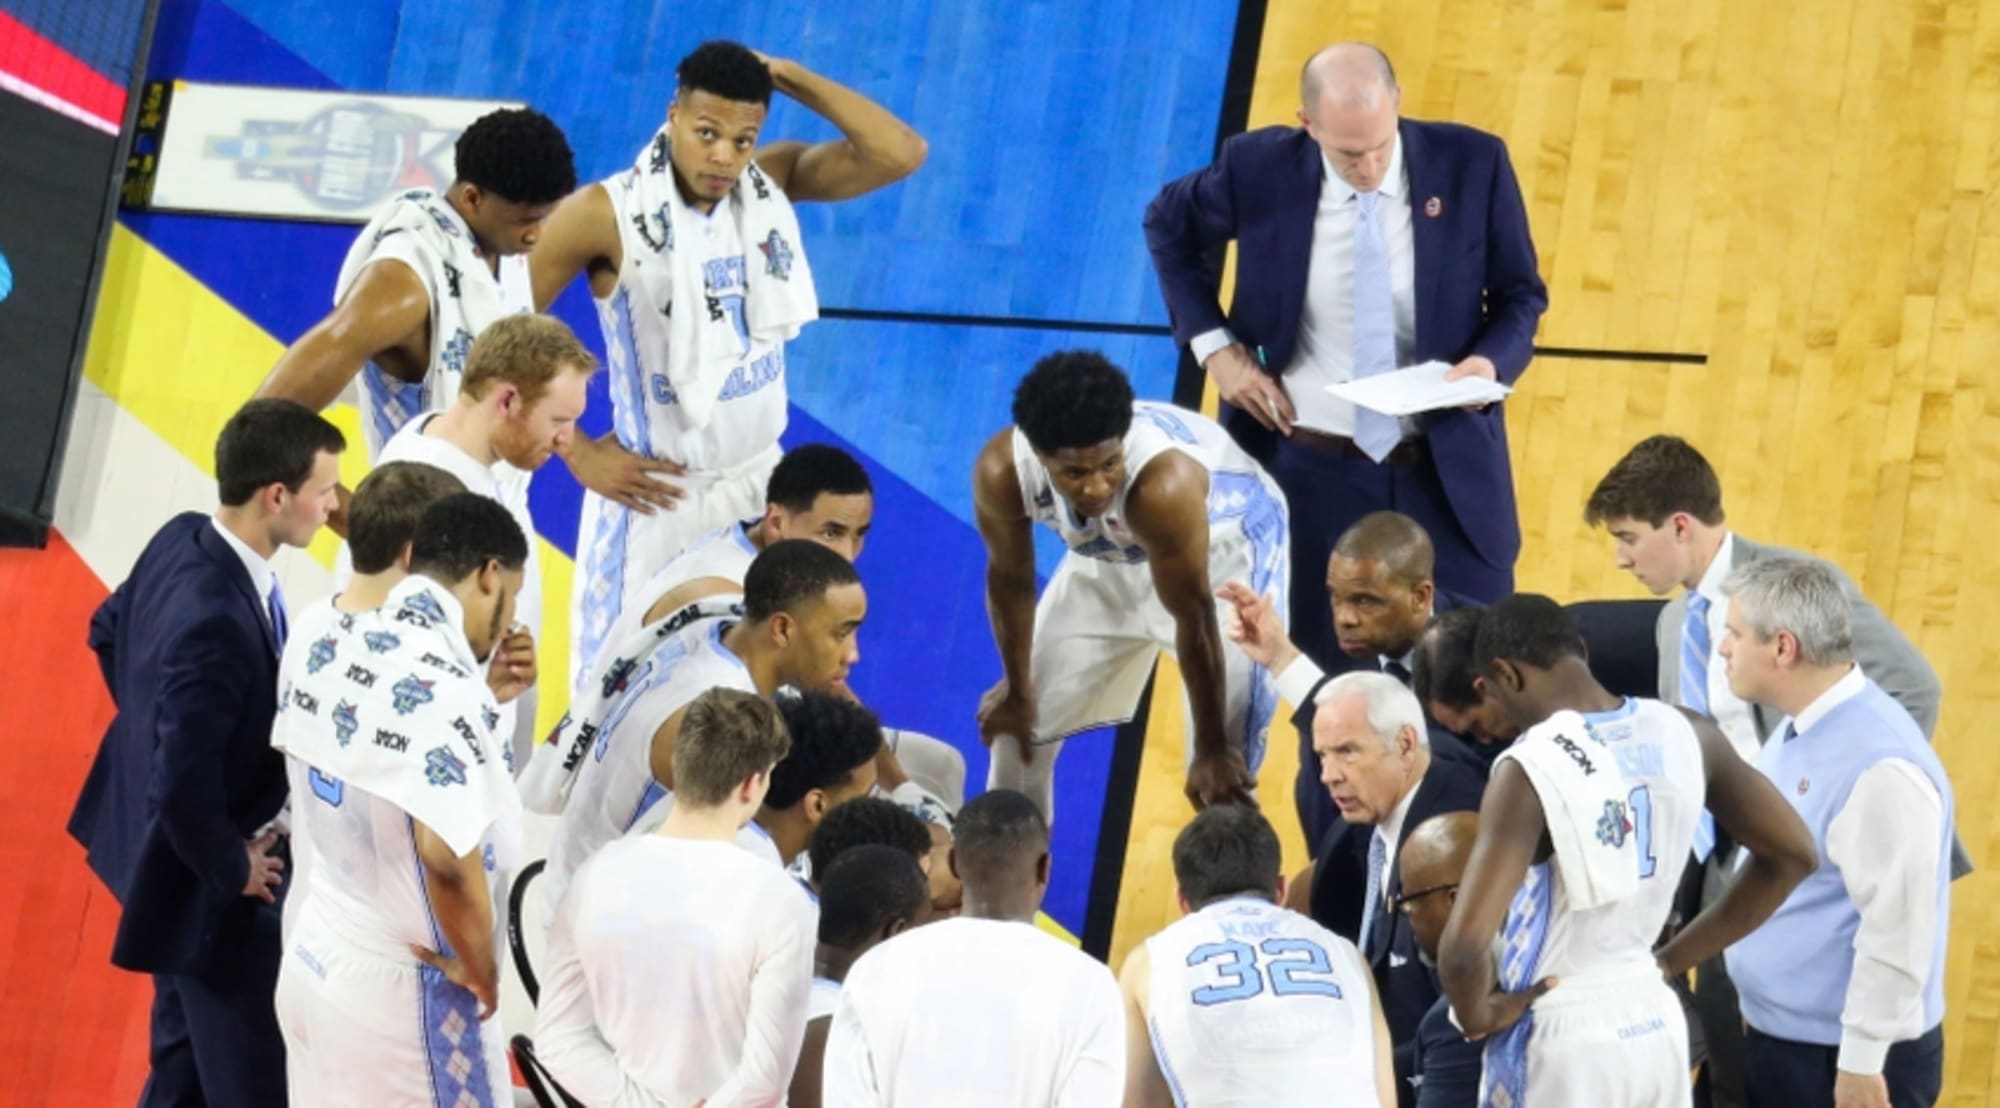 UNC Basketball What to watch for in Friday's exhibition game